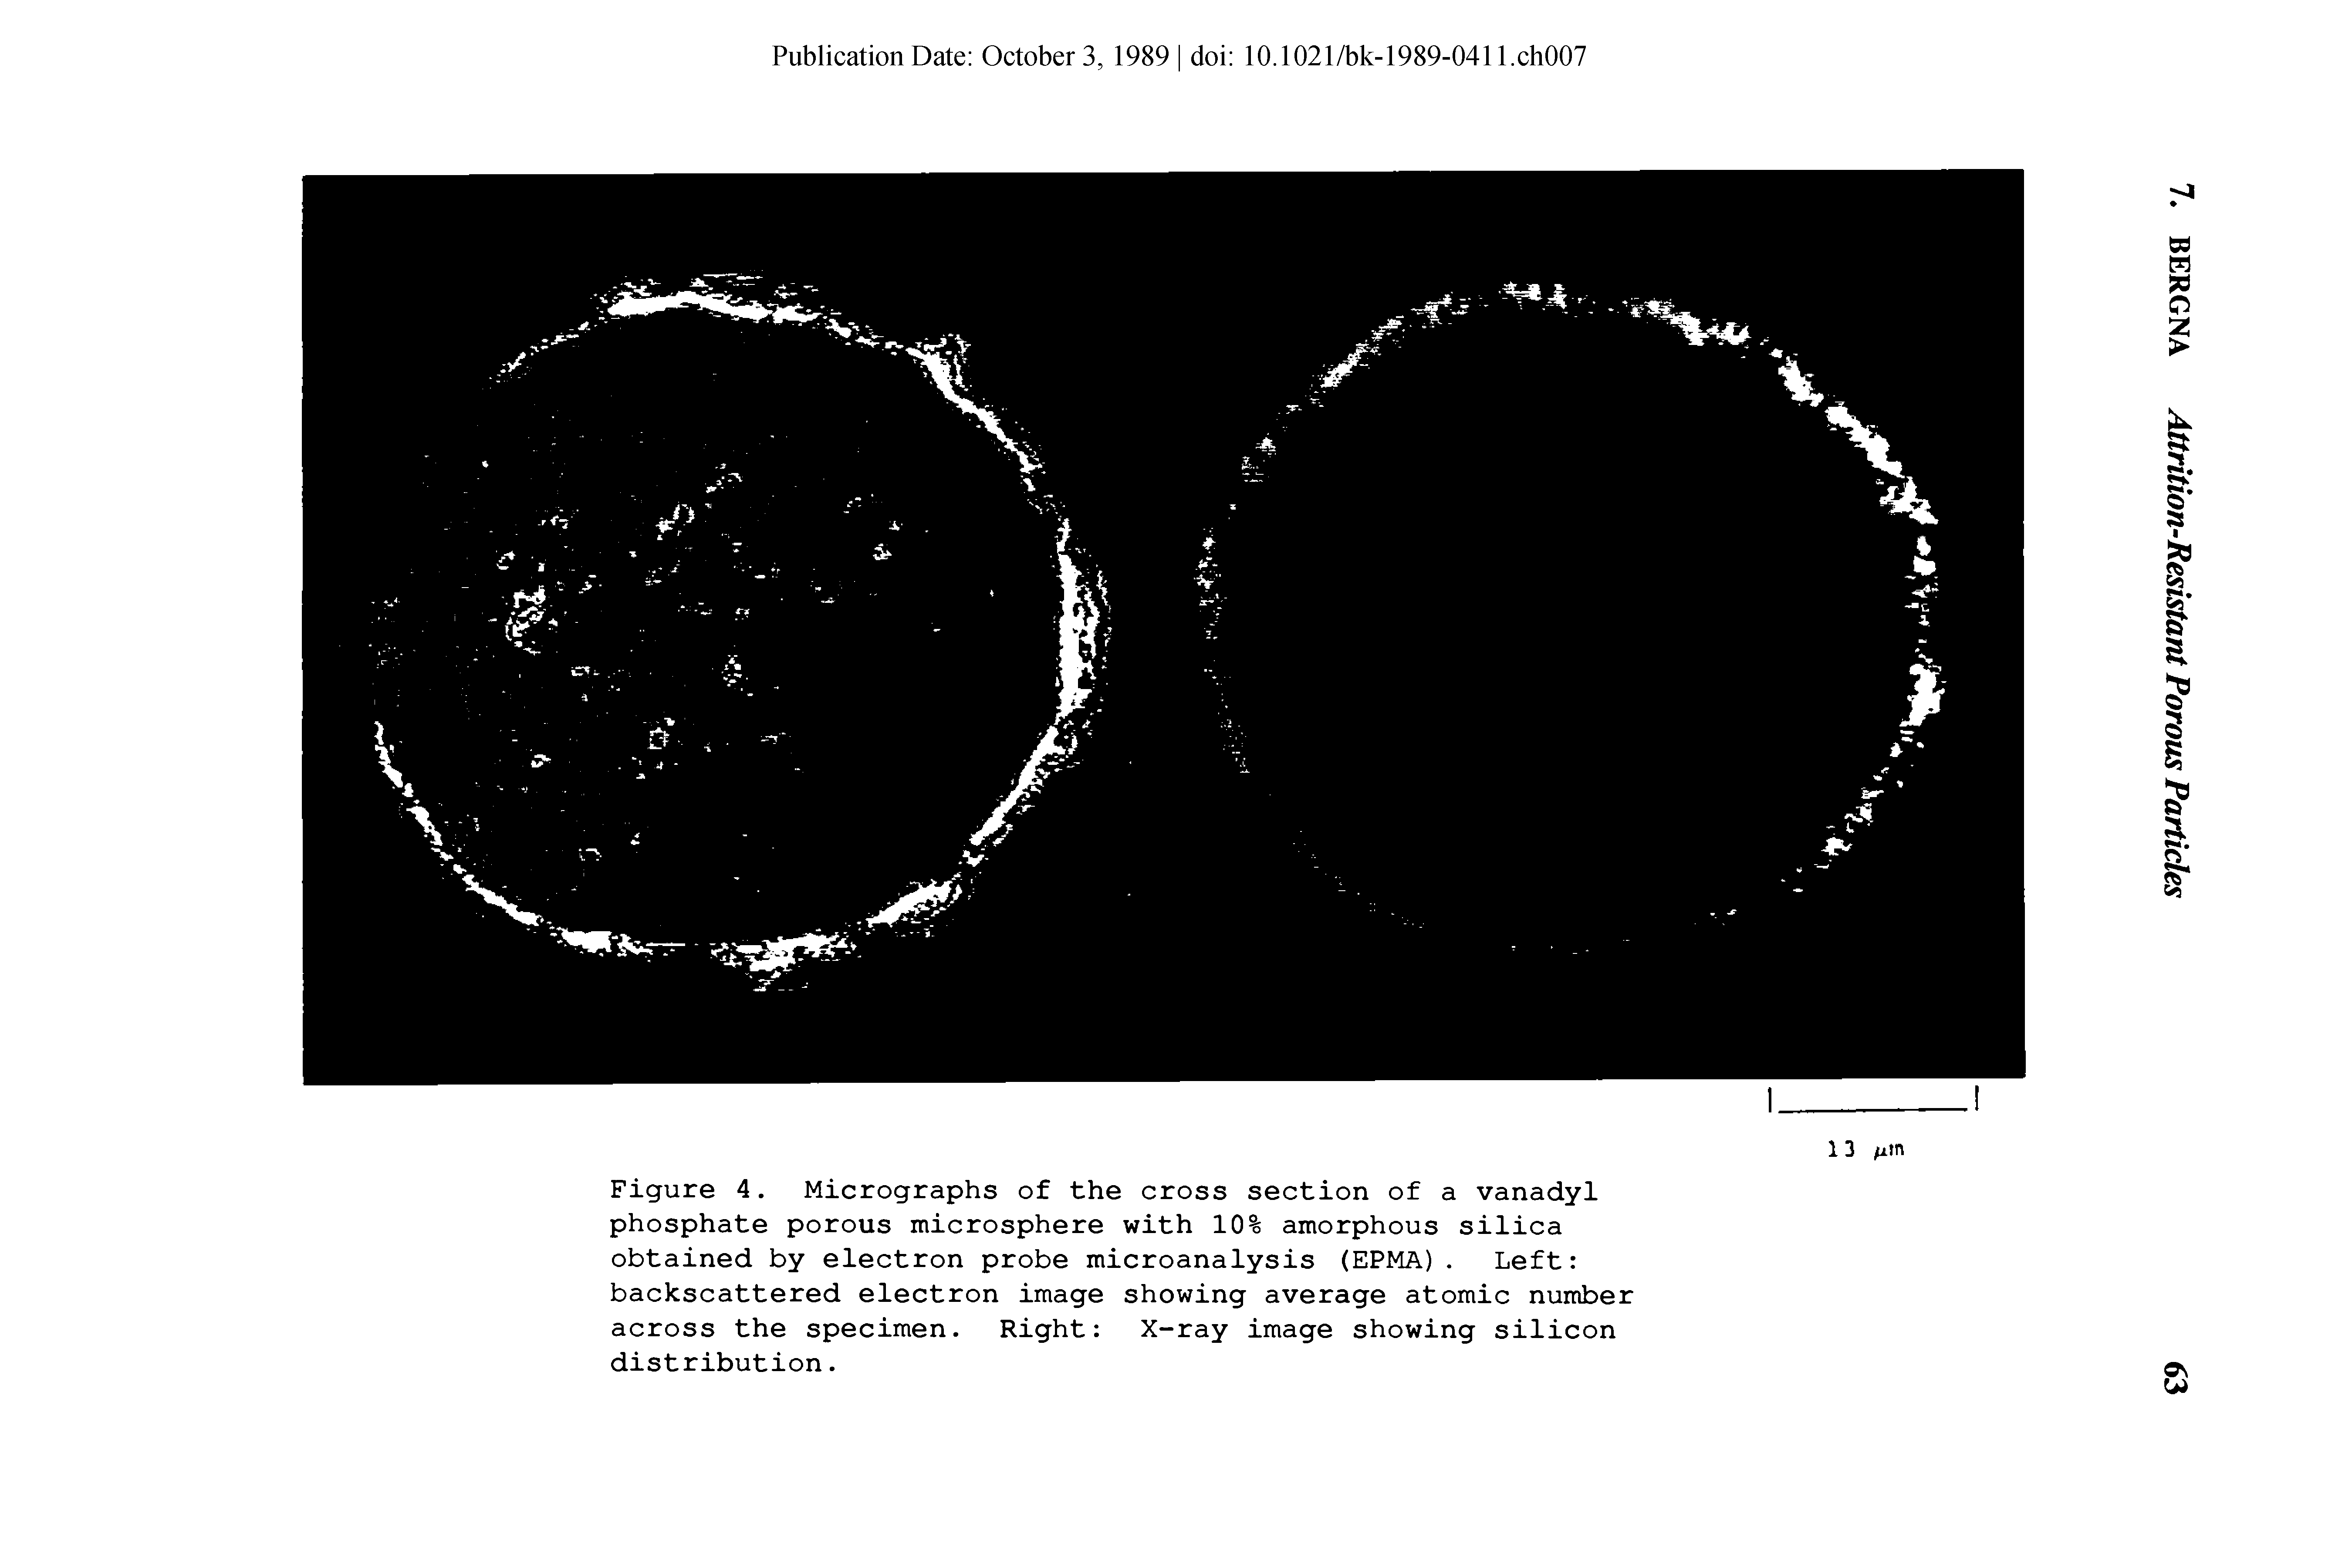 Figure 4. Micrographs of the cross section of a vanadyl phosphate porous microsphere with 10% amorphous silica obtained by electron probe microanalysis (EPMA). Left backscattered electron image showing average atomic number across the specimen. Right X-ray image showing silicon distribution.